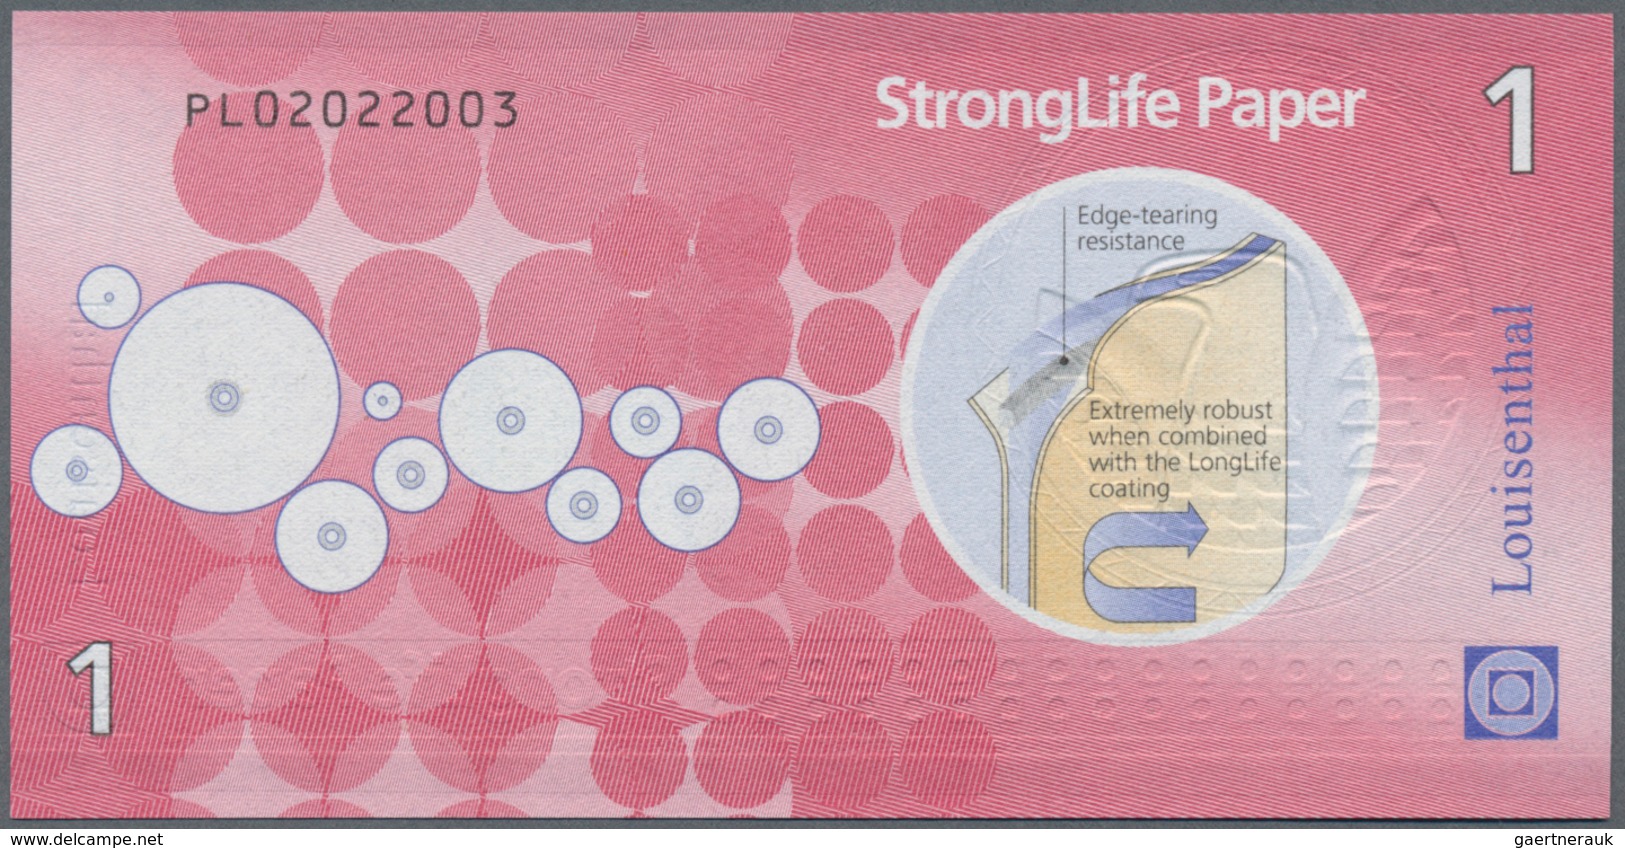 Testbanknoten: Test Note Louisenthal “1 – StrongLife Paper” With Syntech-Substrate. Condition: UNC - Ficción & Especímenes